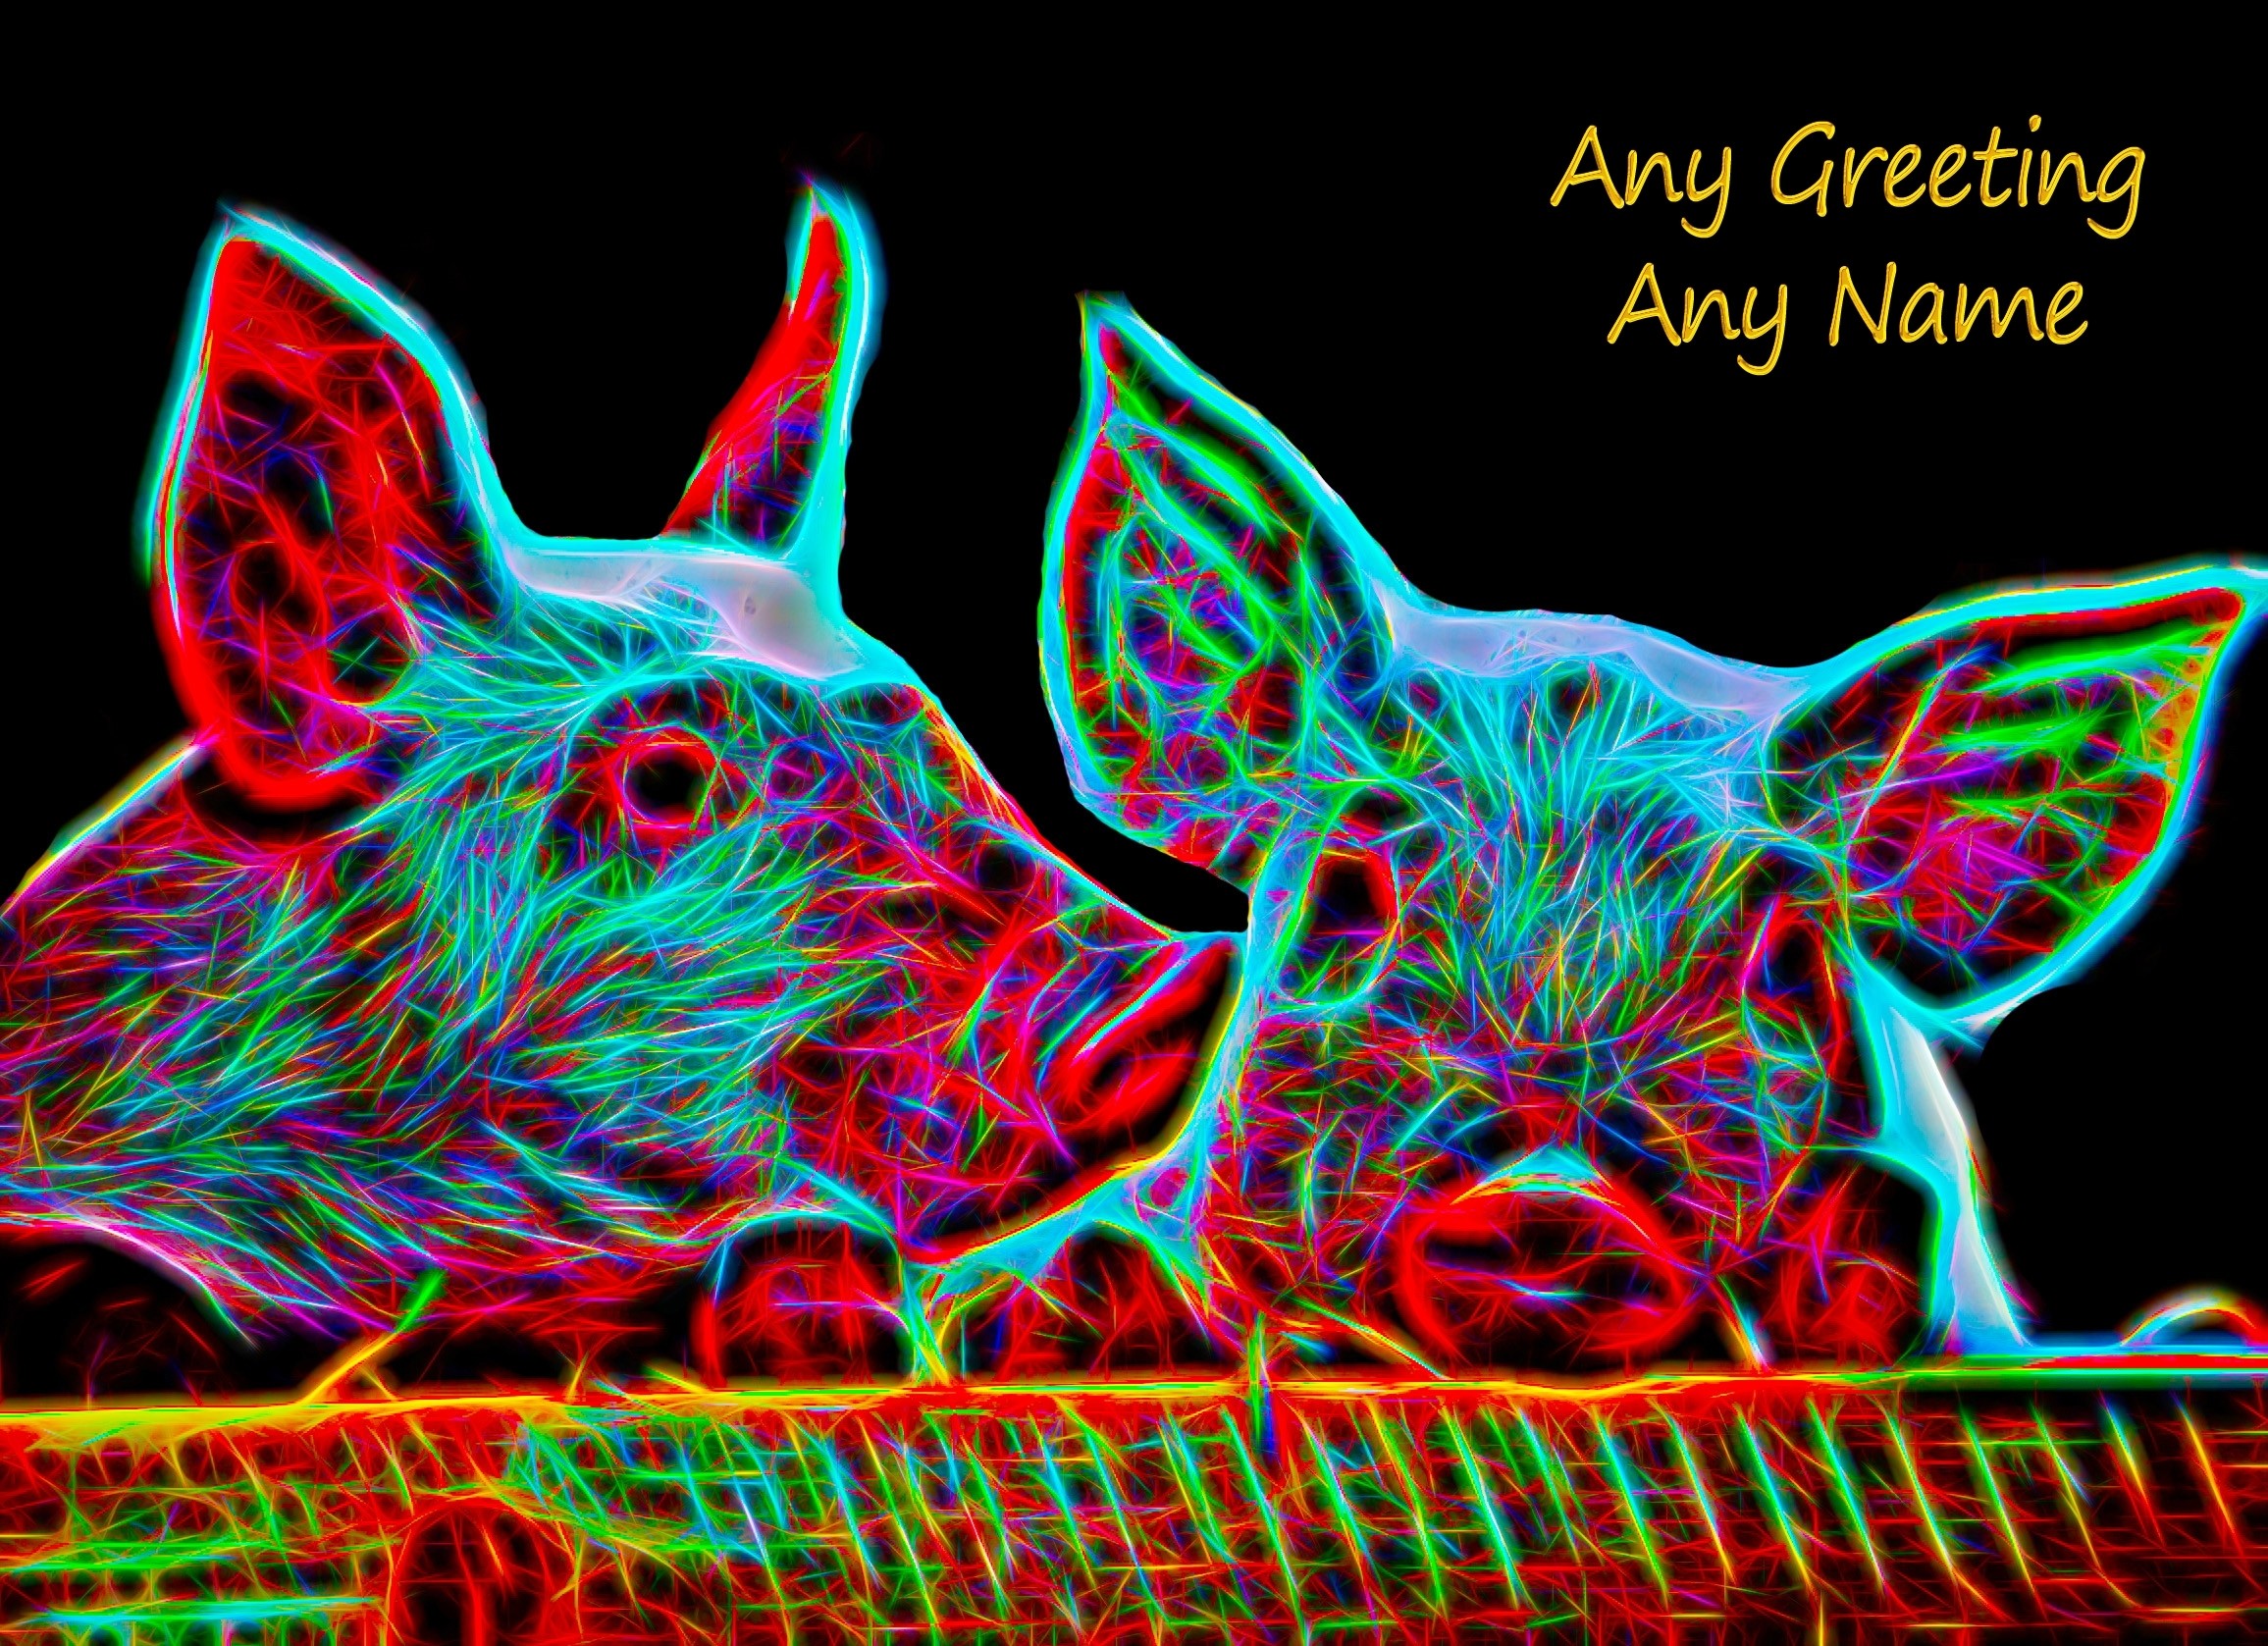 Personalised Pig Neon Art Greeting Card (Birthday, Christmas, Any Occasion)